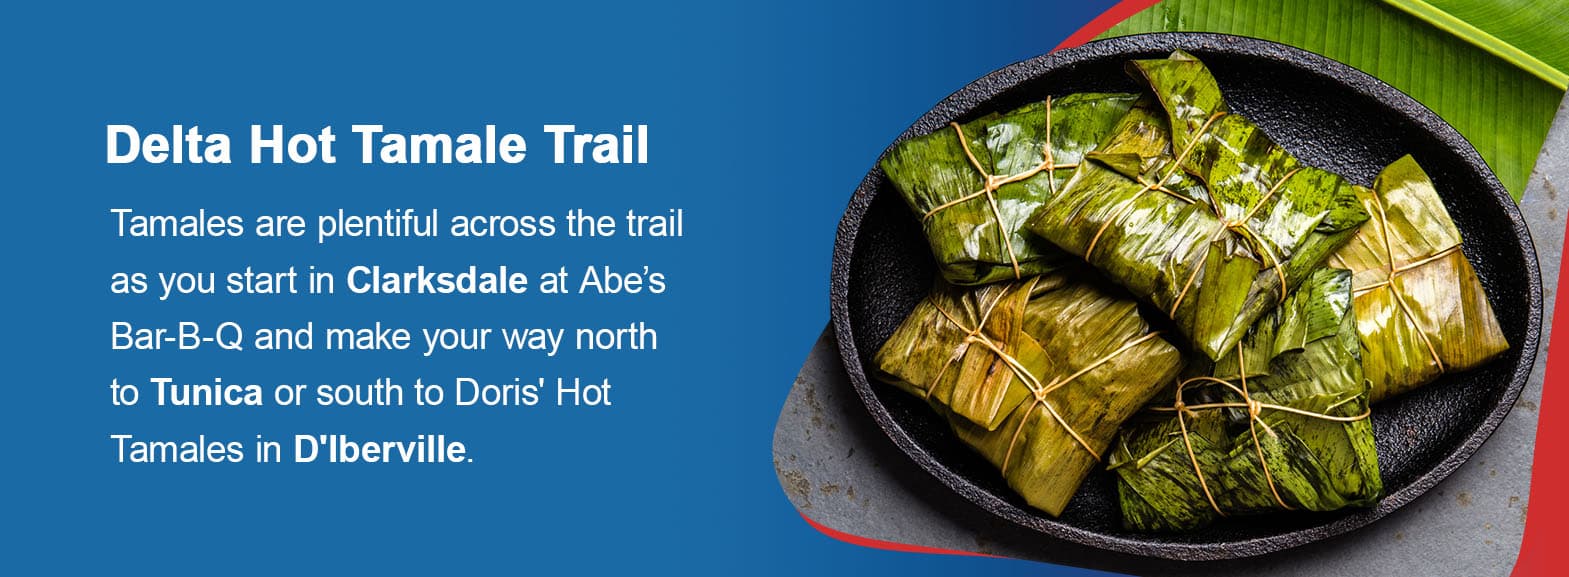 Delta Hot Tamale Trail. Tamales are plentiful across the trail as you start in Clarksdale at Abe’s Bar-B-Q and make your way north to Tunica or south to Doris' Hot Tamales in D'Iberville.